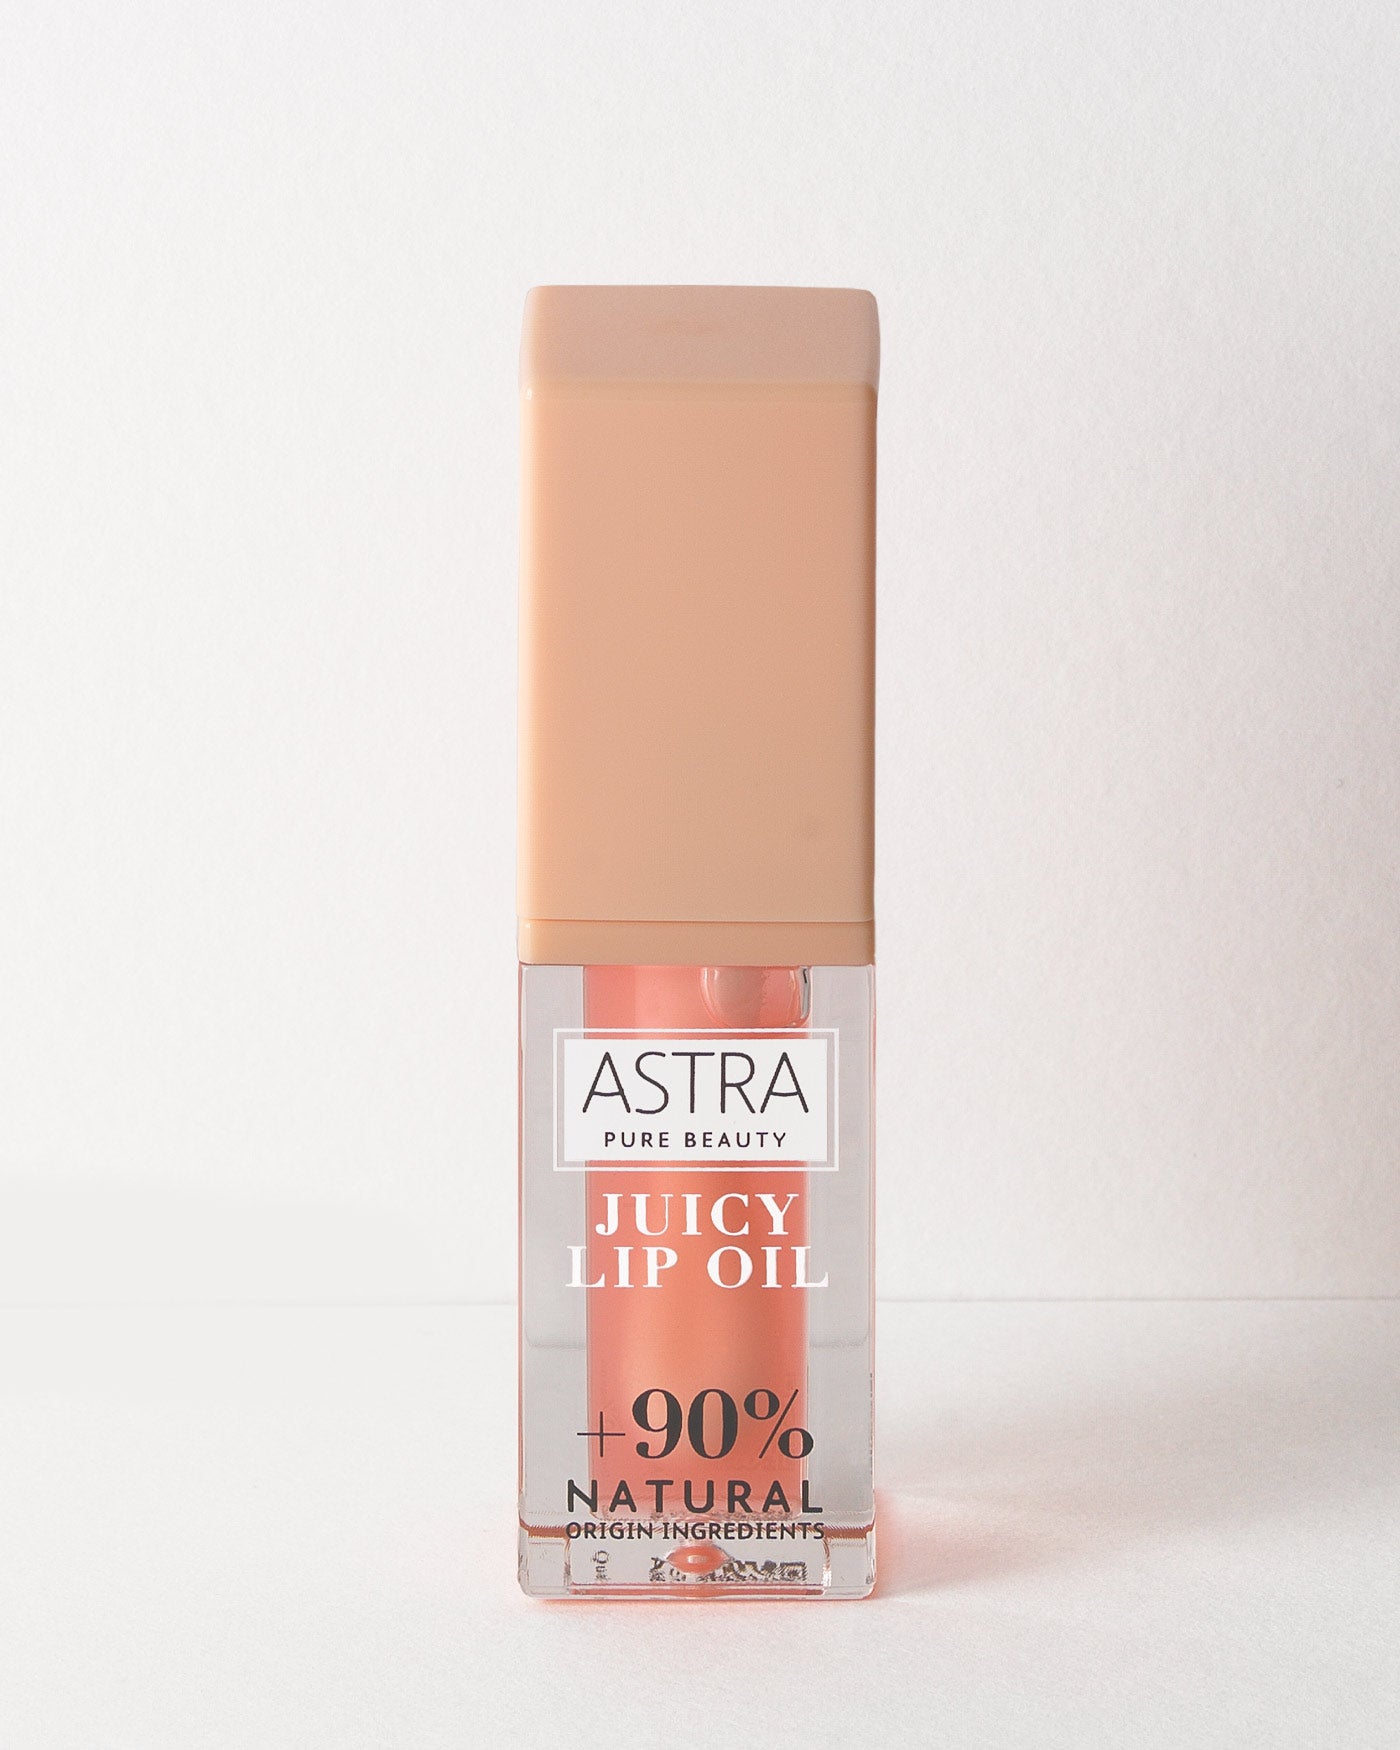 PURE BEAUTY JUICY LIP OIL - Best Seller - Astra Make-Up